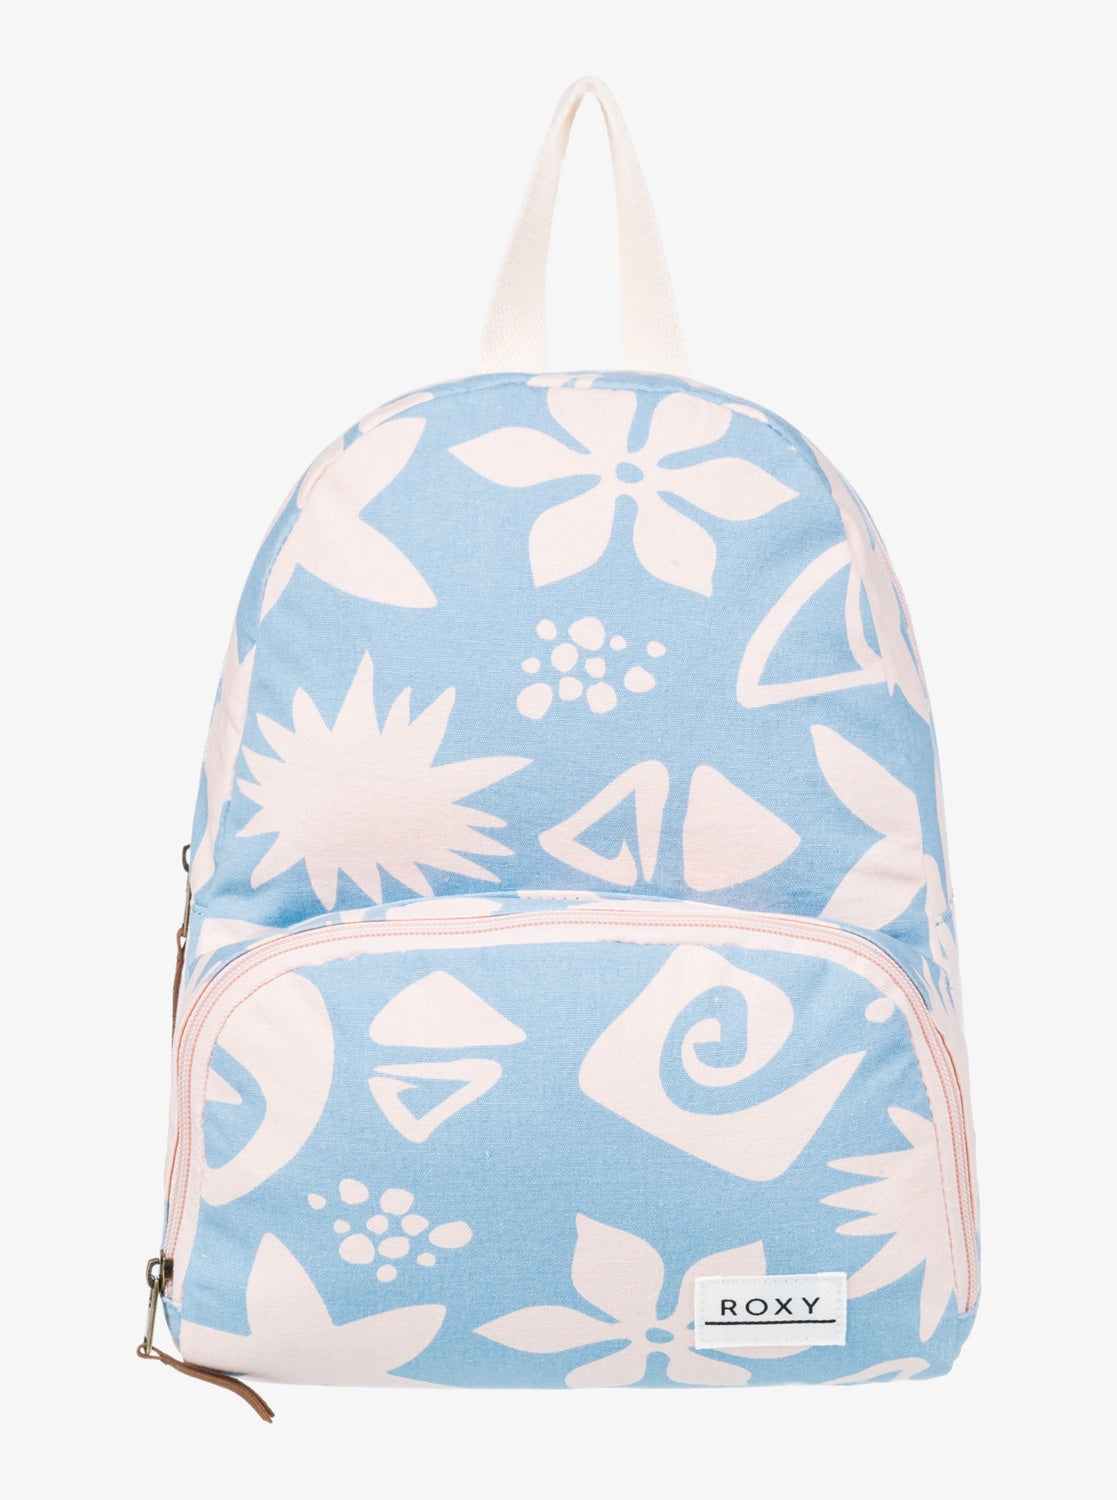 ALWAYS CORE CANVAS BACKPACK